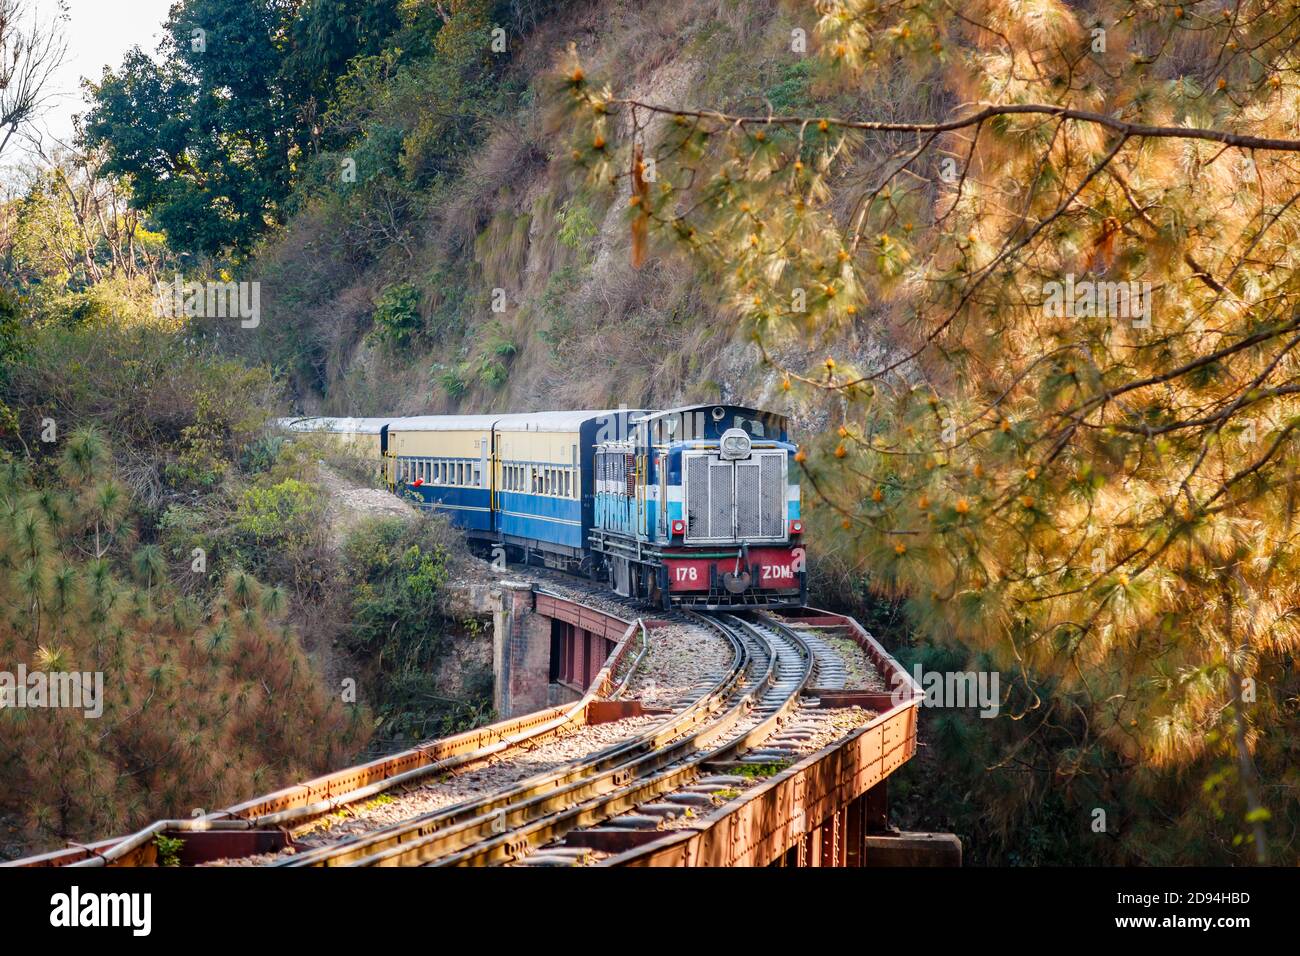 An approaching blue Indian diesel train on railway tracks over a bridge through a gorge in Himachal Pradesh, northern India Stock Photo